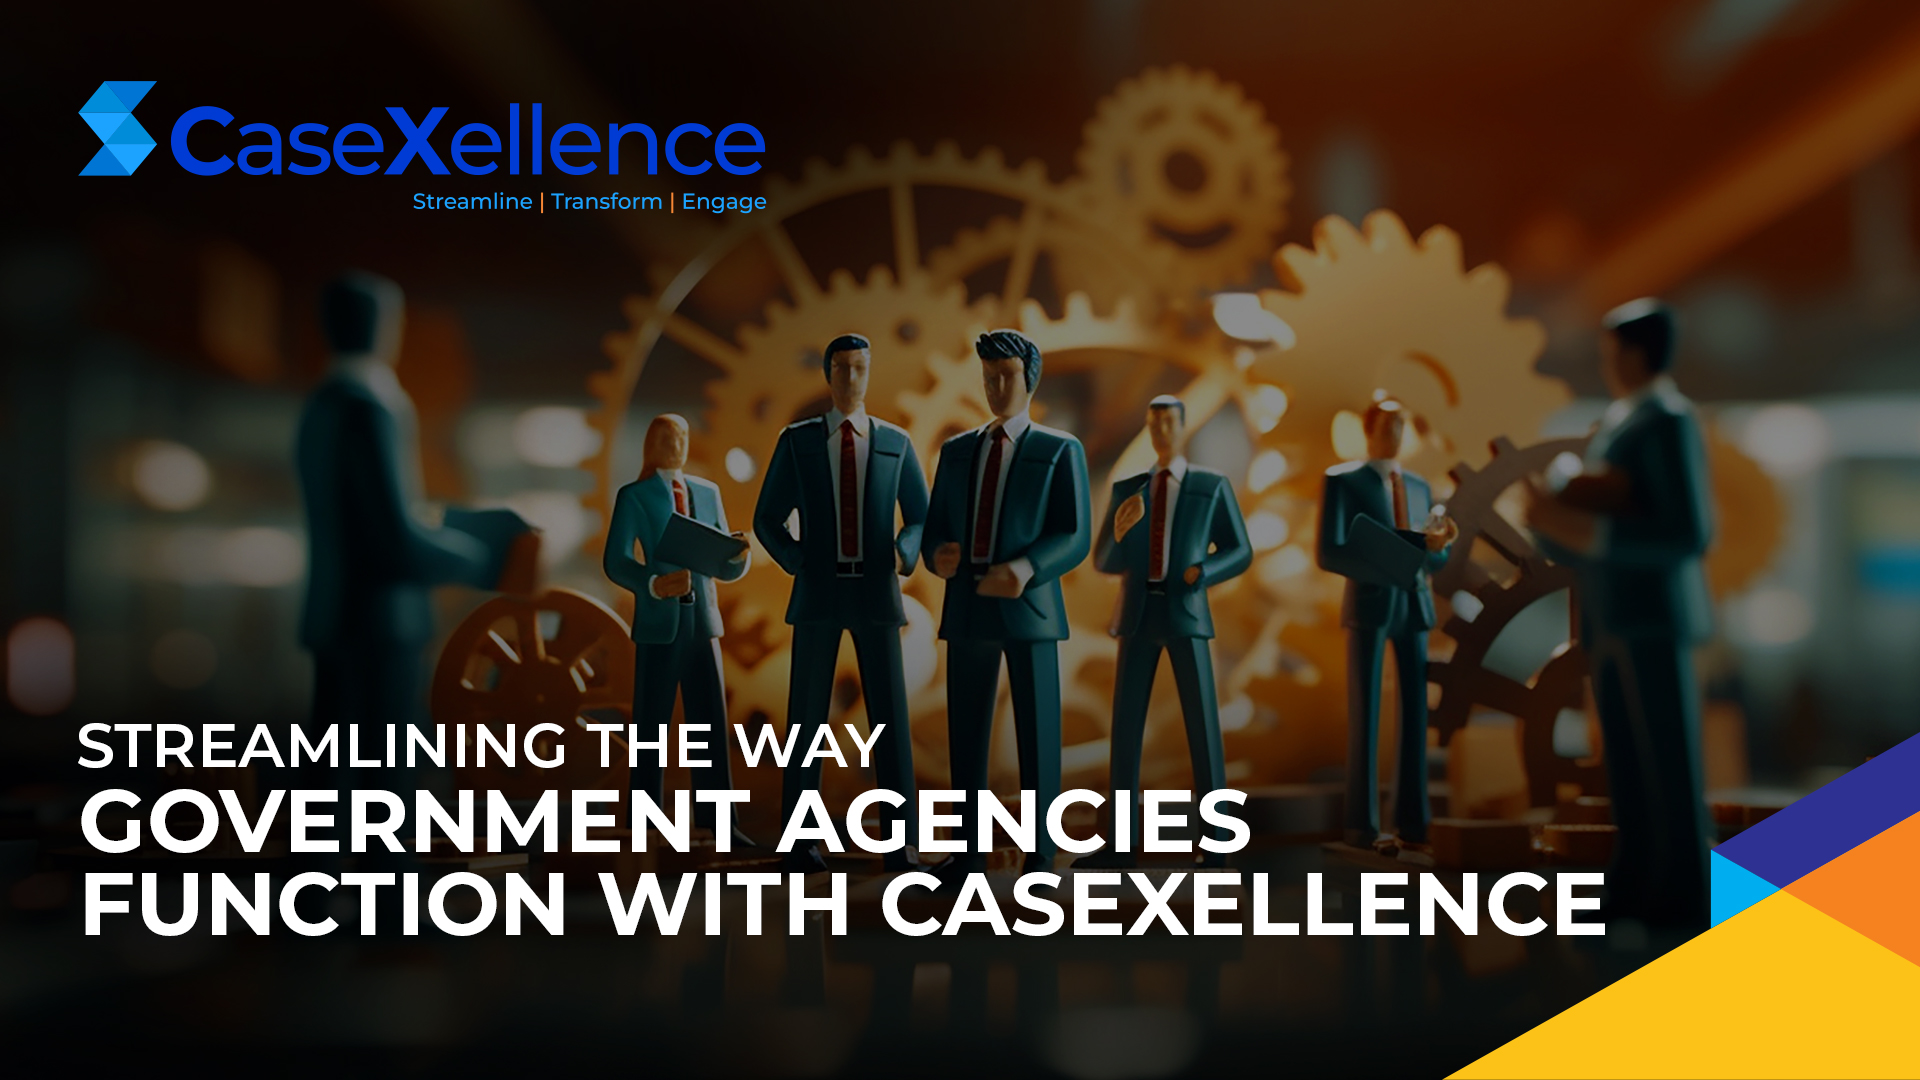 Streamlining the way Government Agencies function with CaseXellence